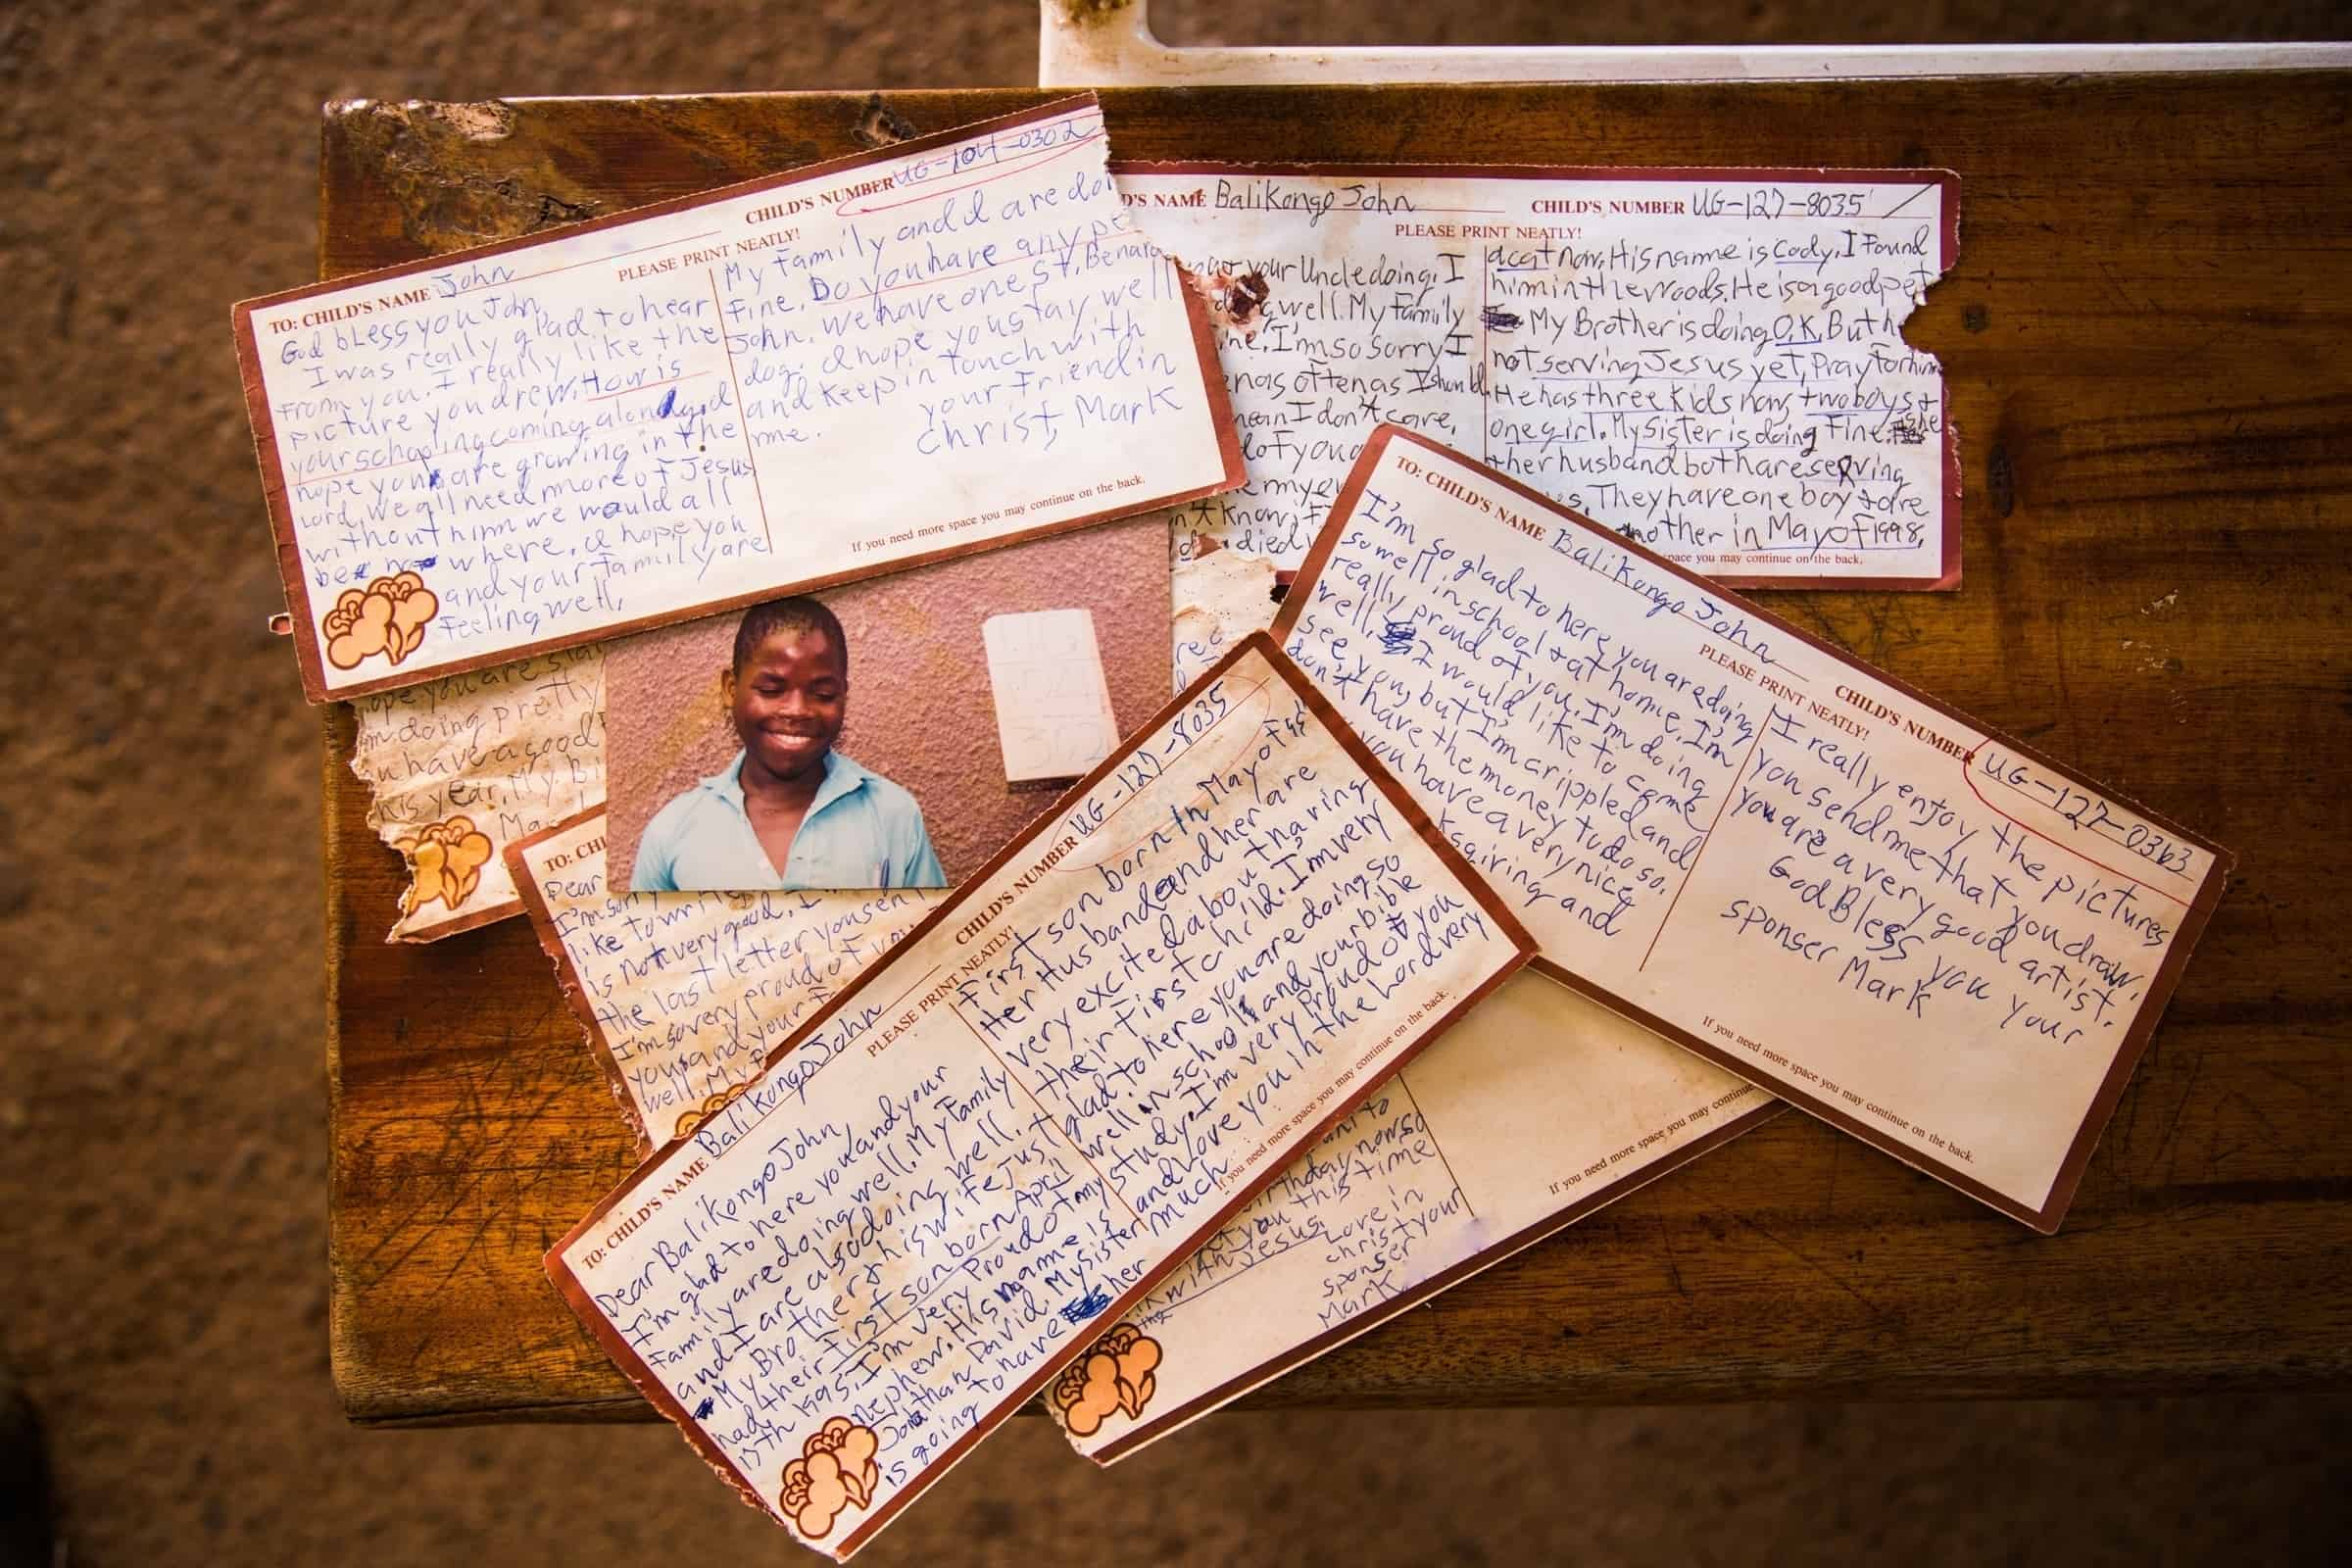 Do My Letters to the Child I Sponsor Actually Matter